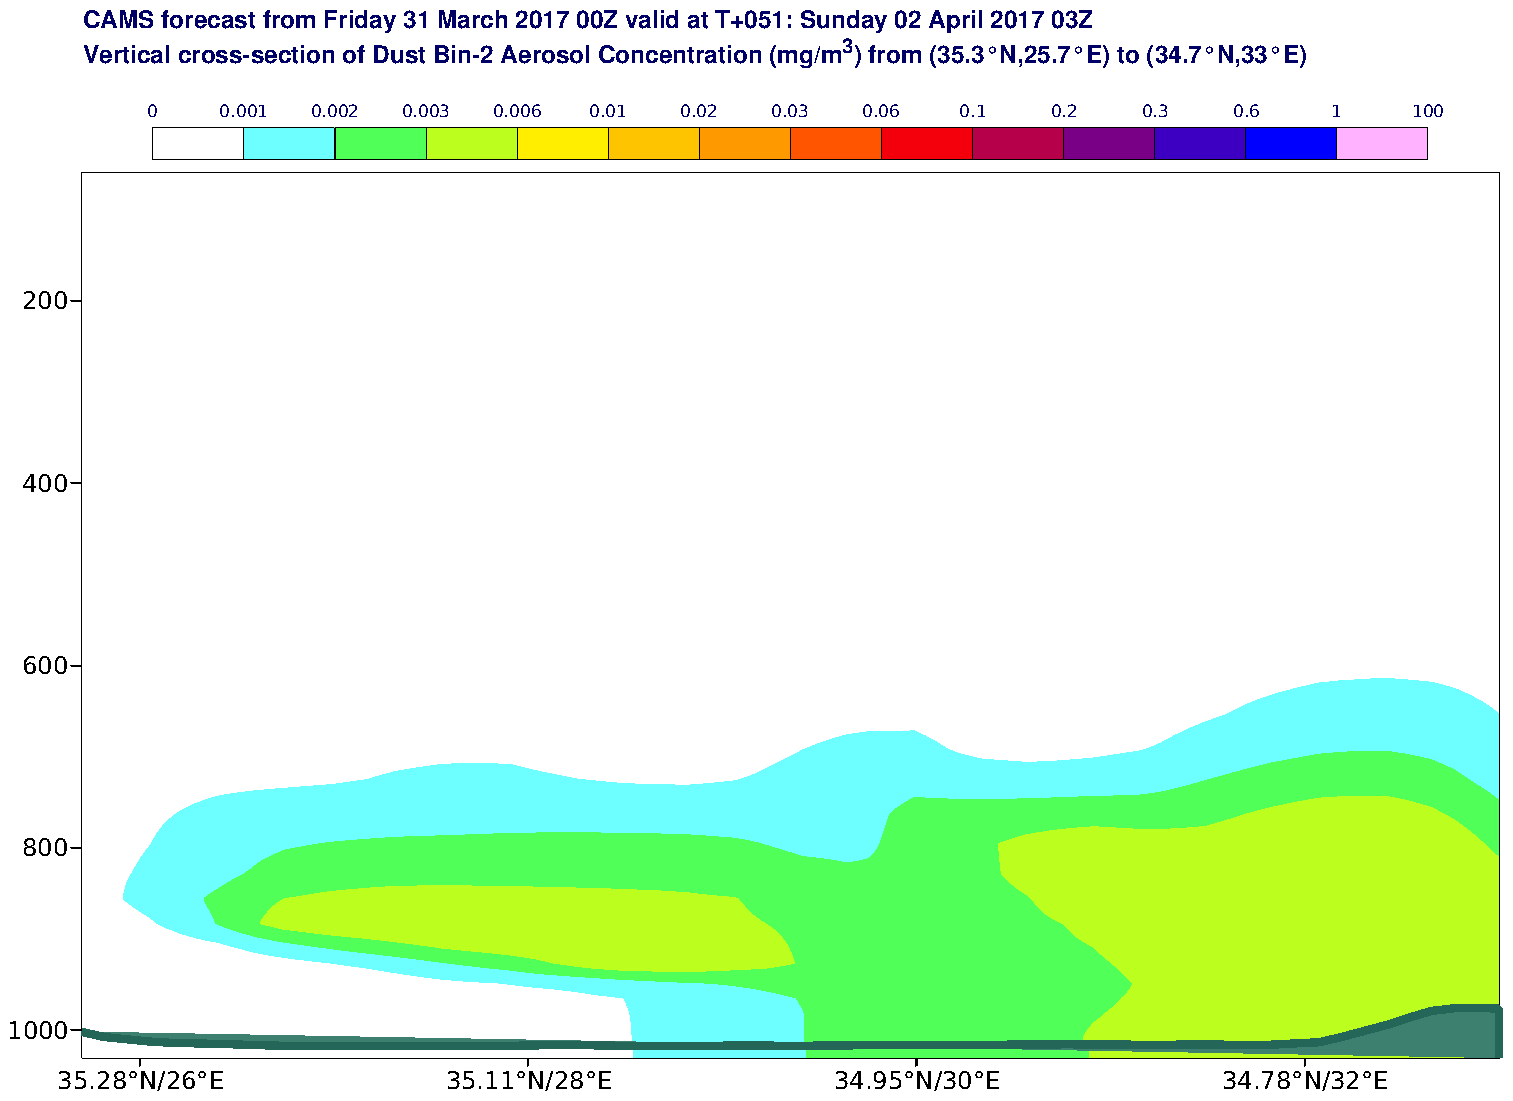 Vertical cross-section of Dust Bin-2 Aerosol Concentration (mg/m3) valid at T51 - 2017-04-02 03:00